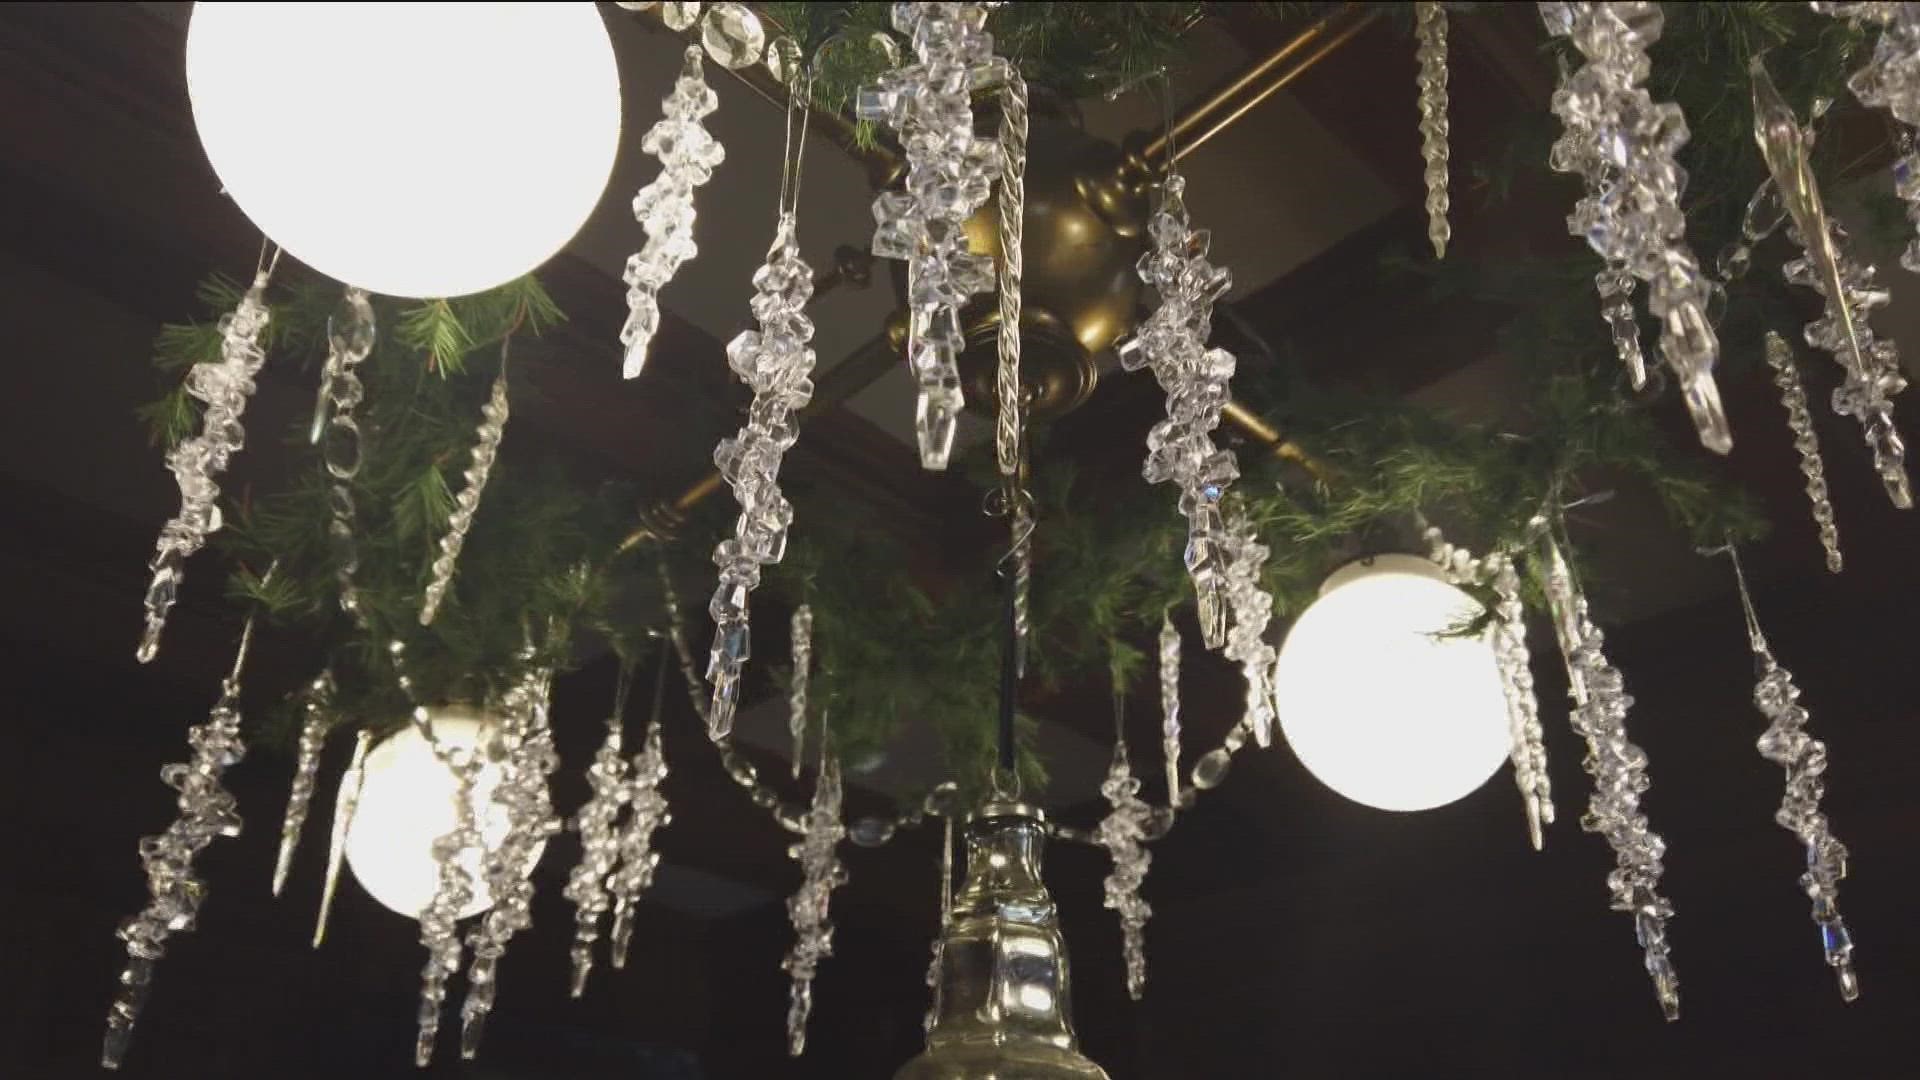 Check out the 25 Christmas trees and other decorations at the historic Old West End home.